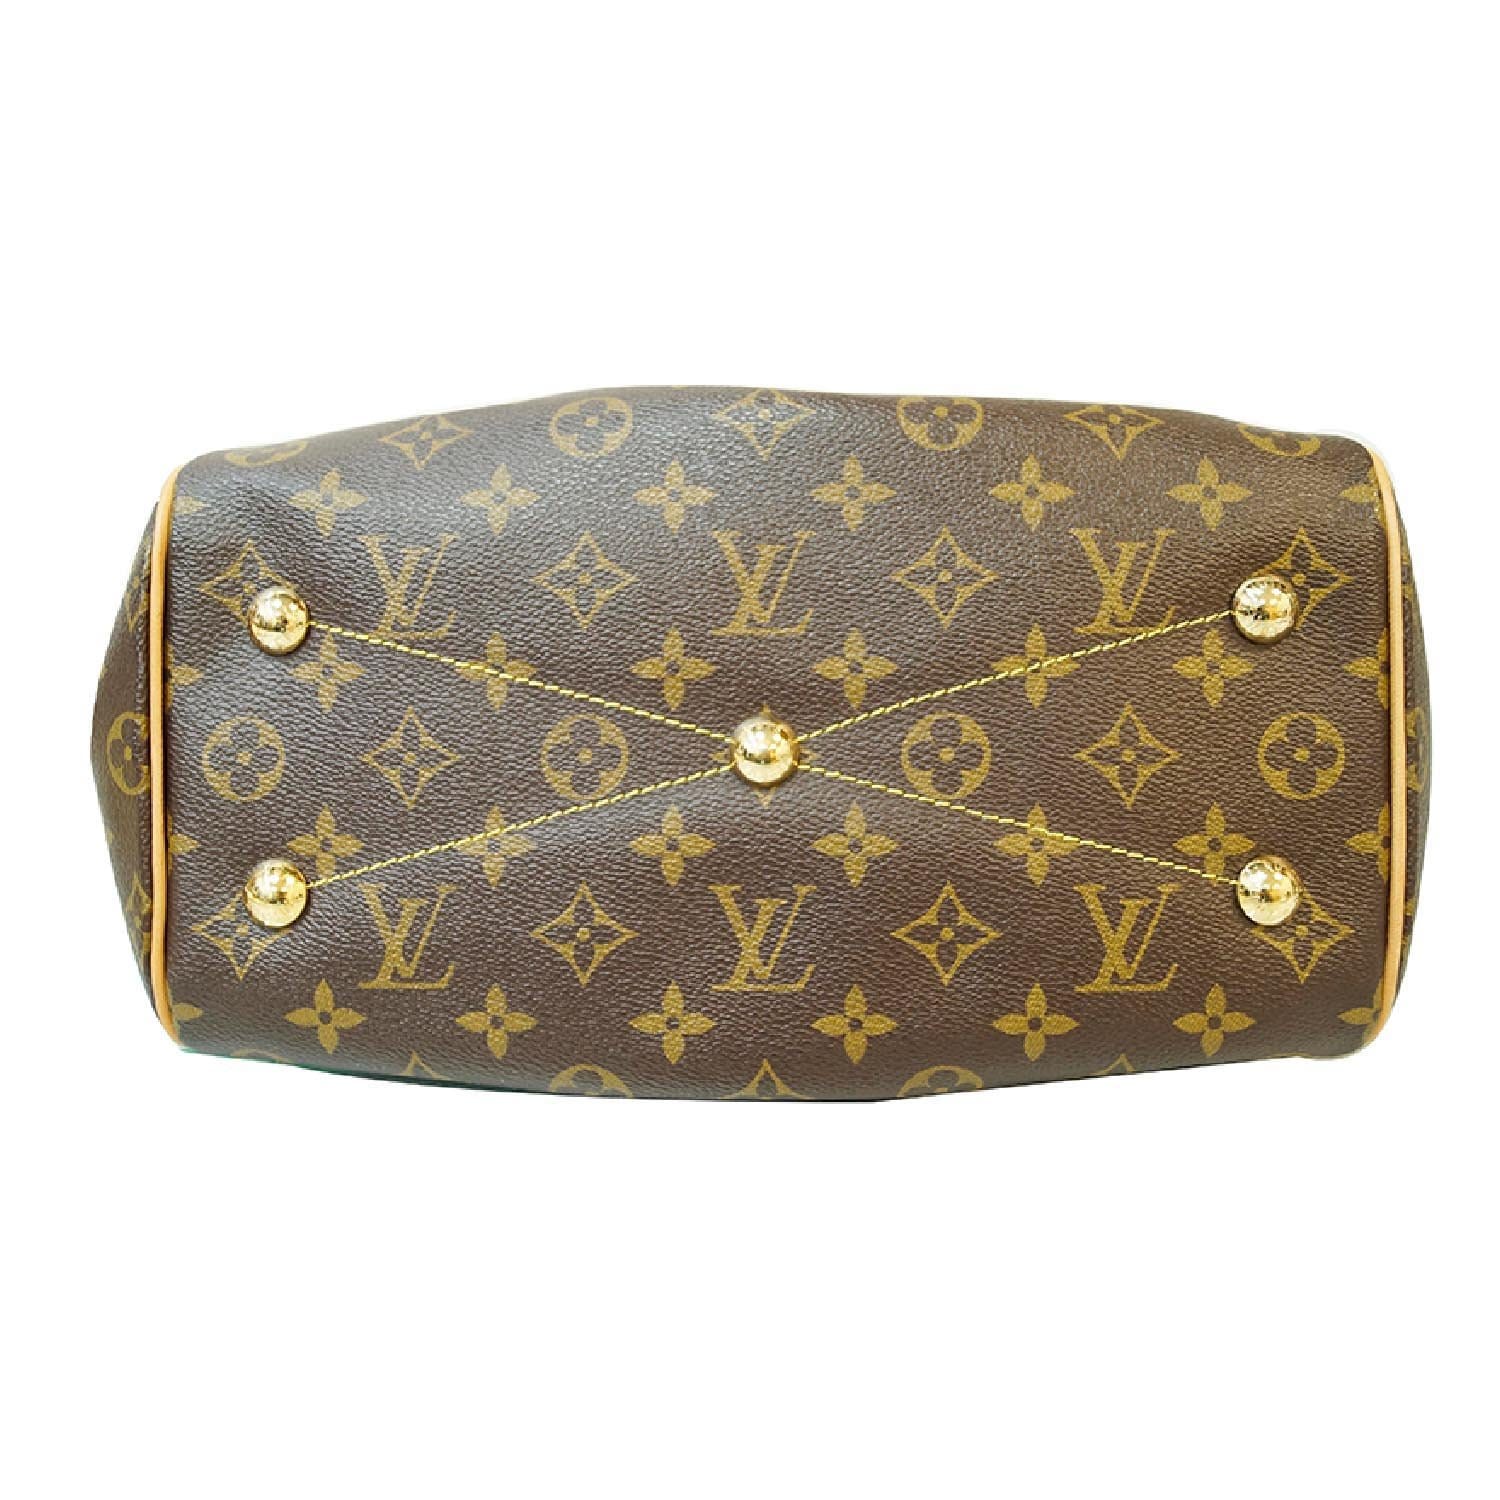 Select from our Louis Vuitton 2009 Monogram Canvas Tivoli PM Shoulder Bag  Louis Vuitton to get the look at the Lower Cost